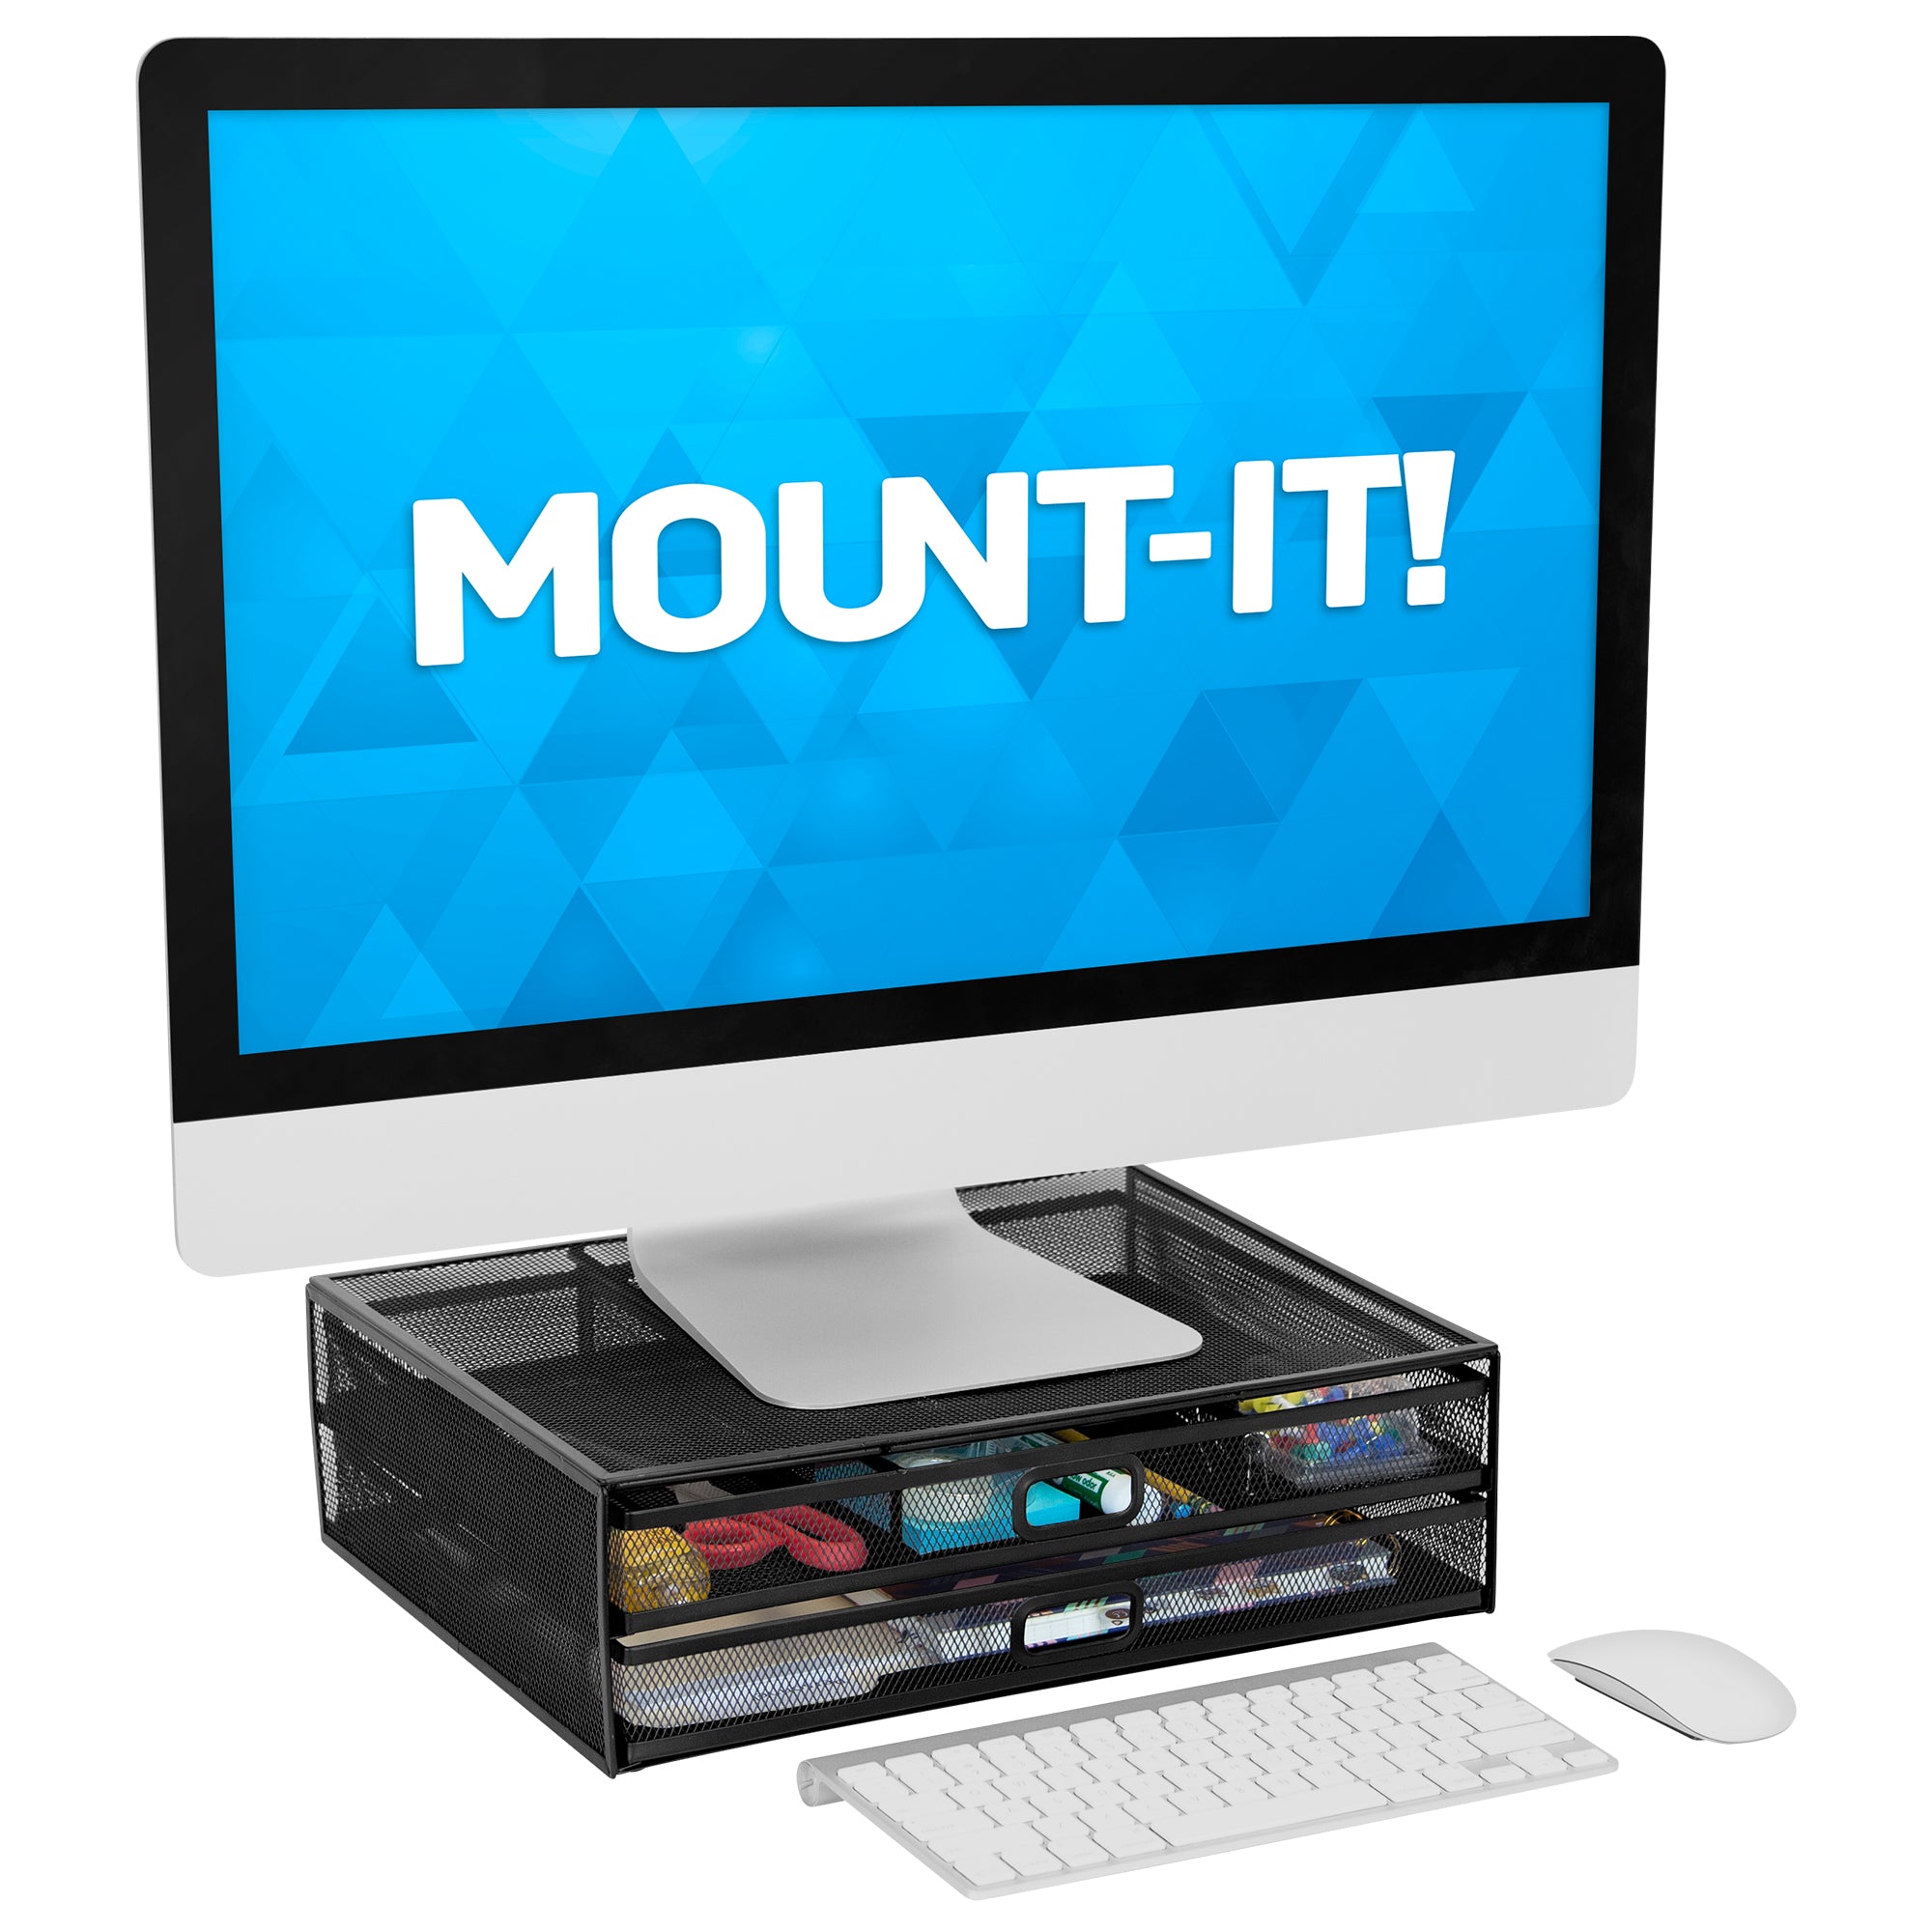 Mesh Computer Monitor Stand W/ Two Drawers